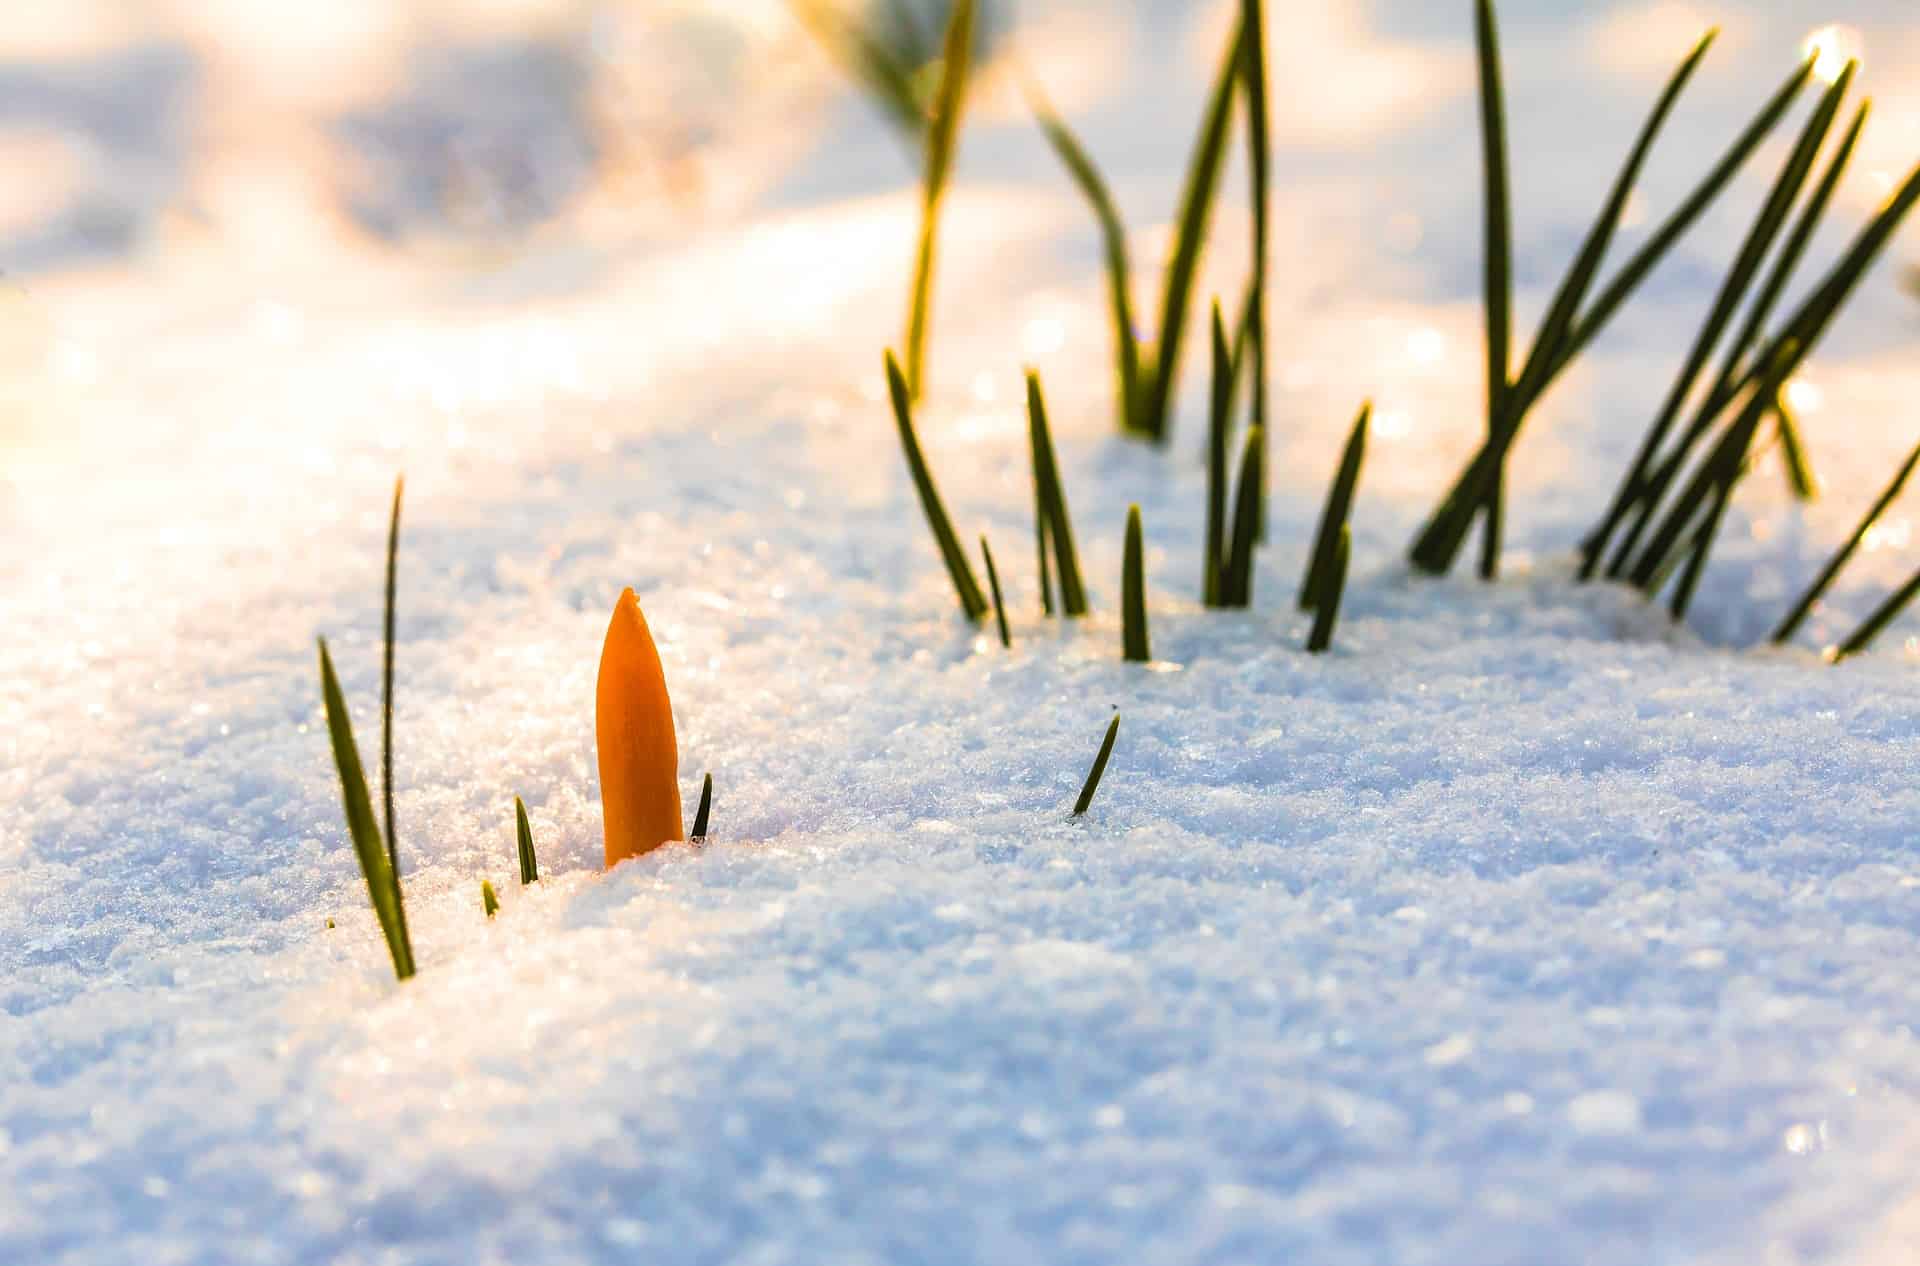 Tip of yellow crocus popping up through the snow